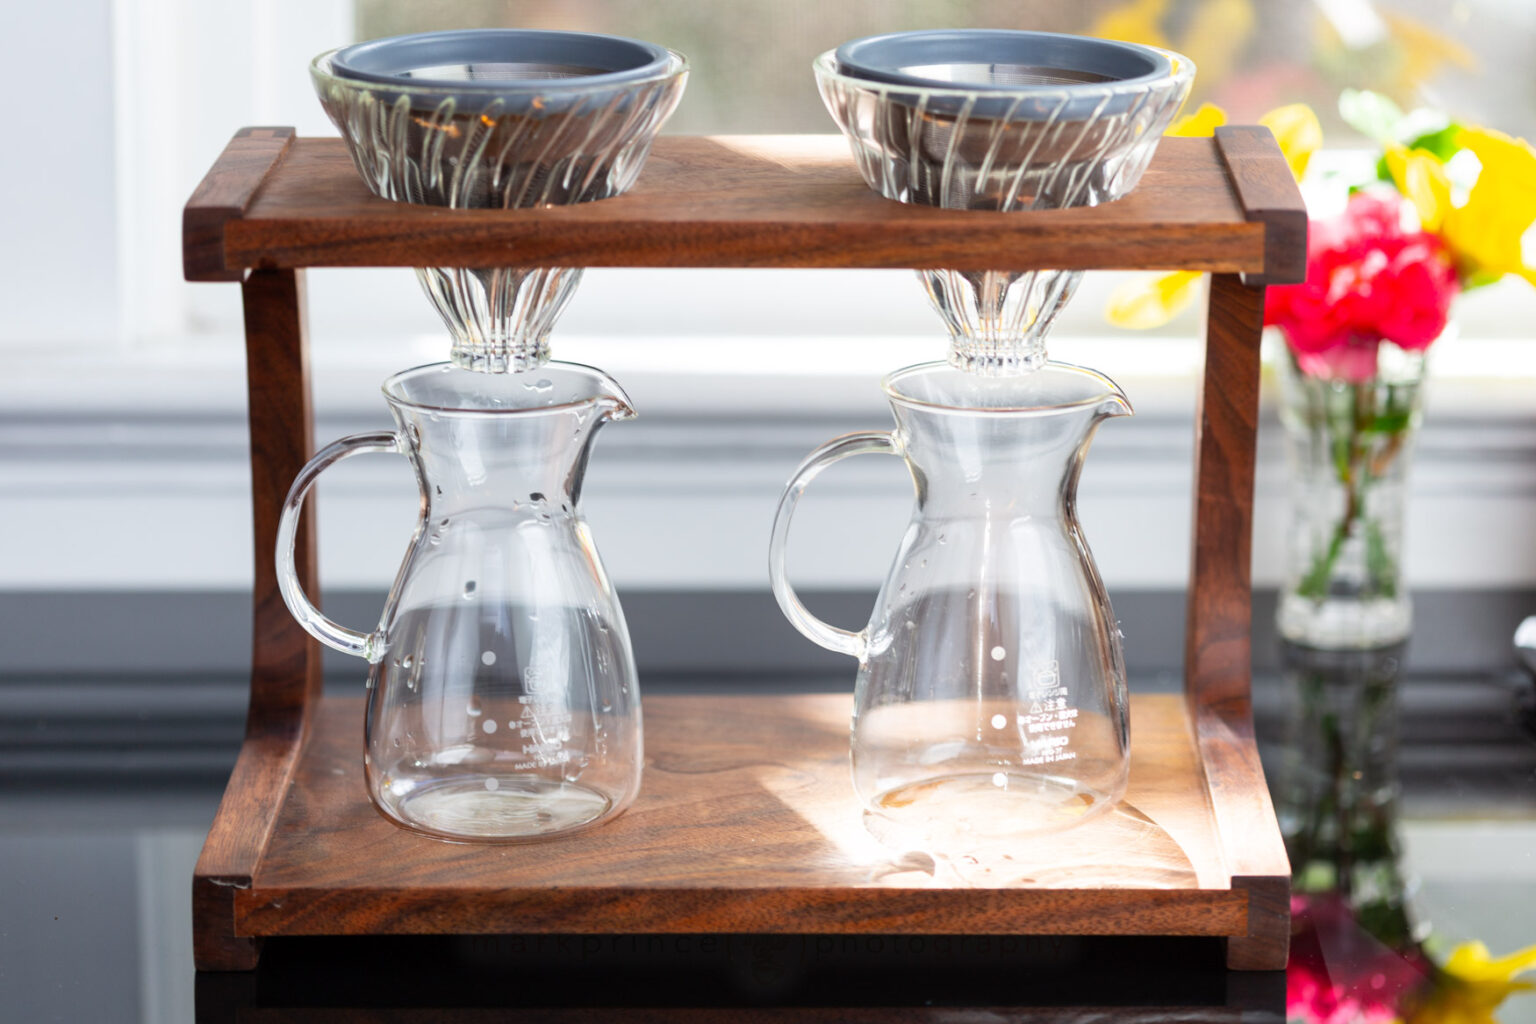 A custom two-brewer brewing stand made by Clive Coffee, works well with the Kone Minis.